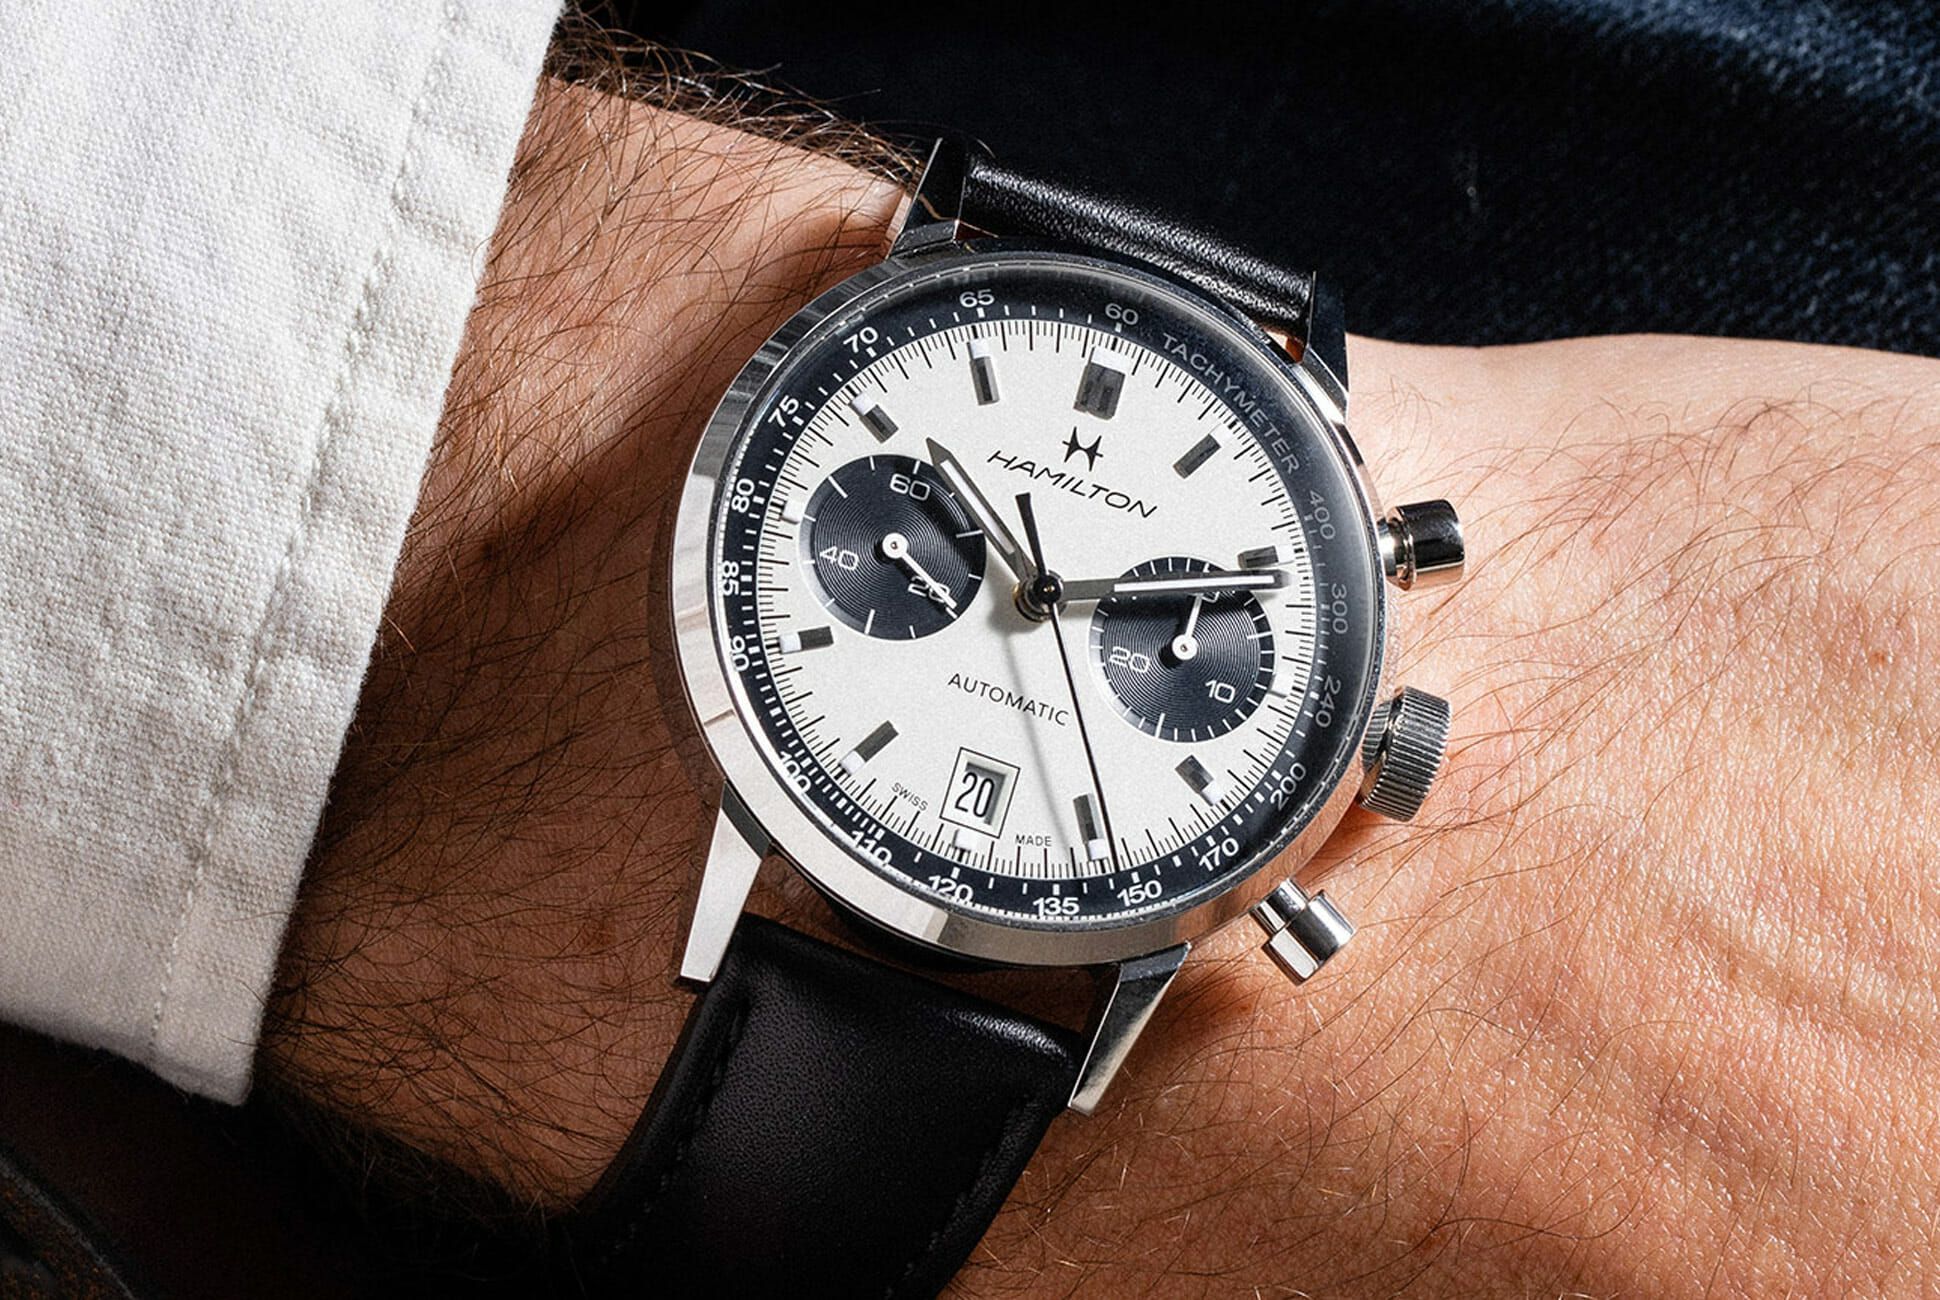 5-Questions-to-Ask-Before-You-Buy-a-Chronograph-Watch-gear-patrol-lead-full.jpg